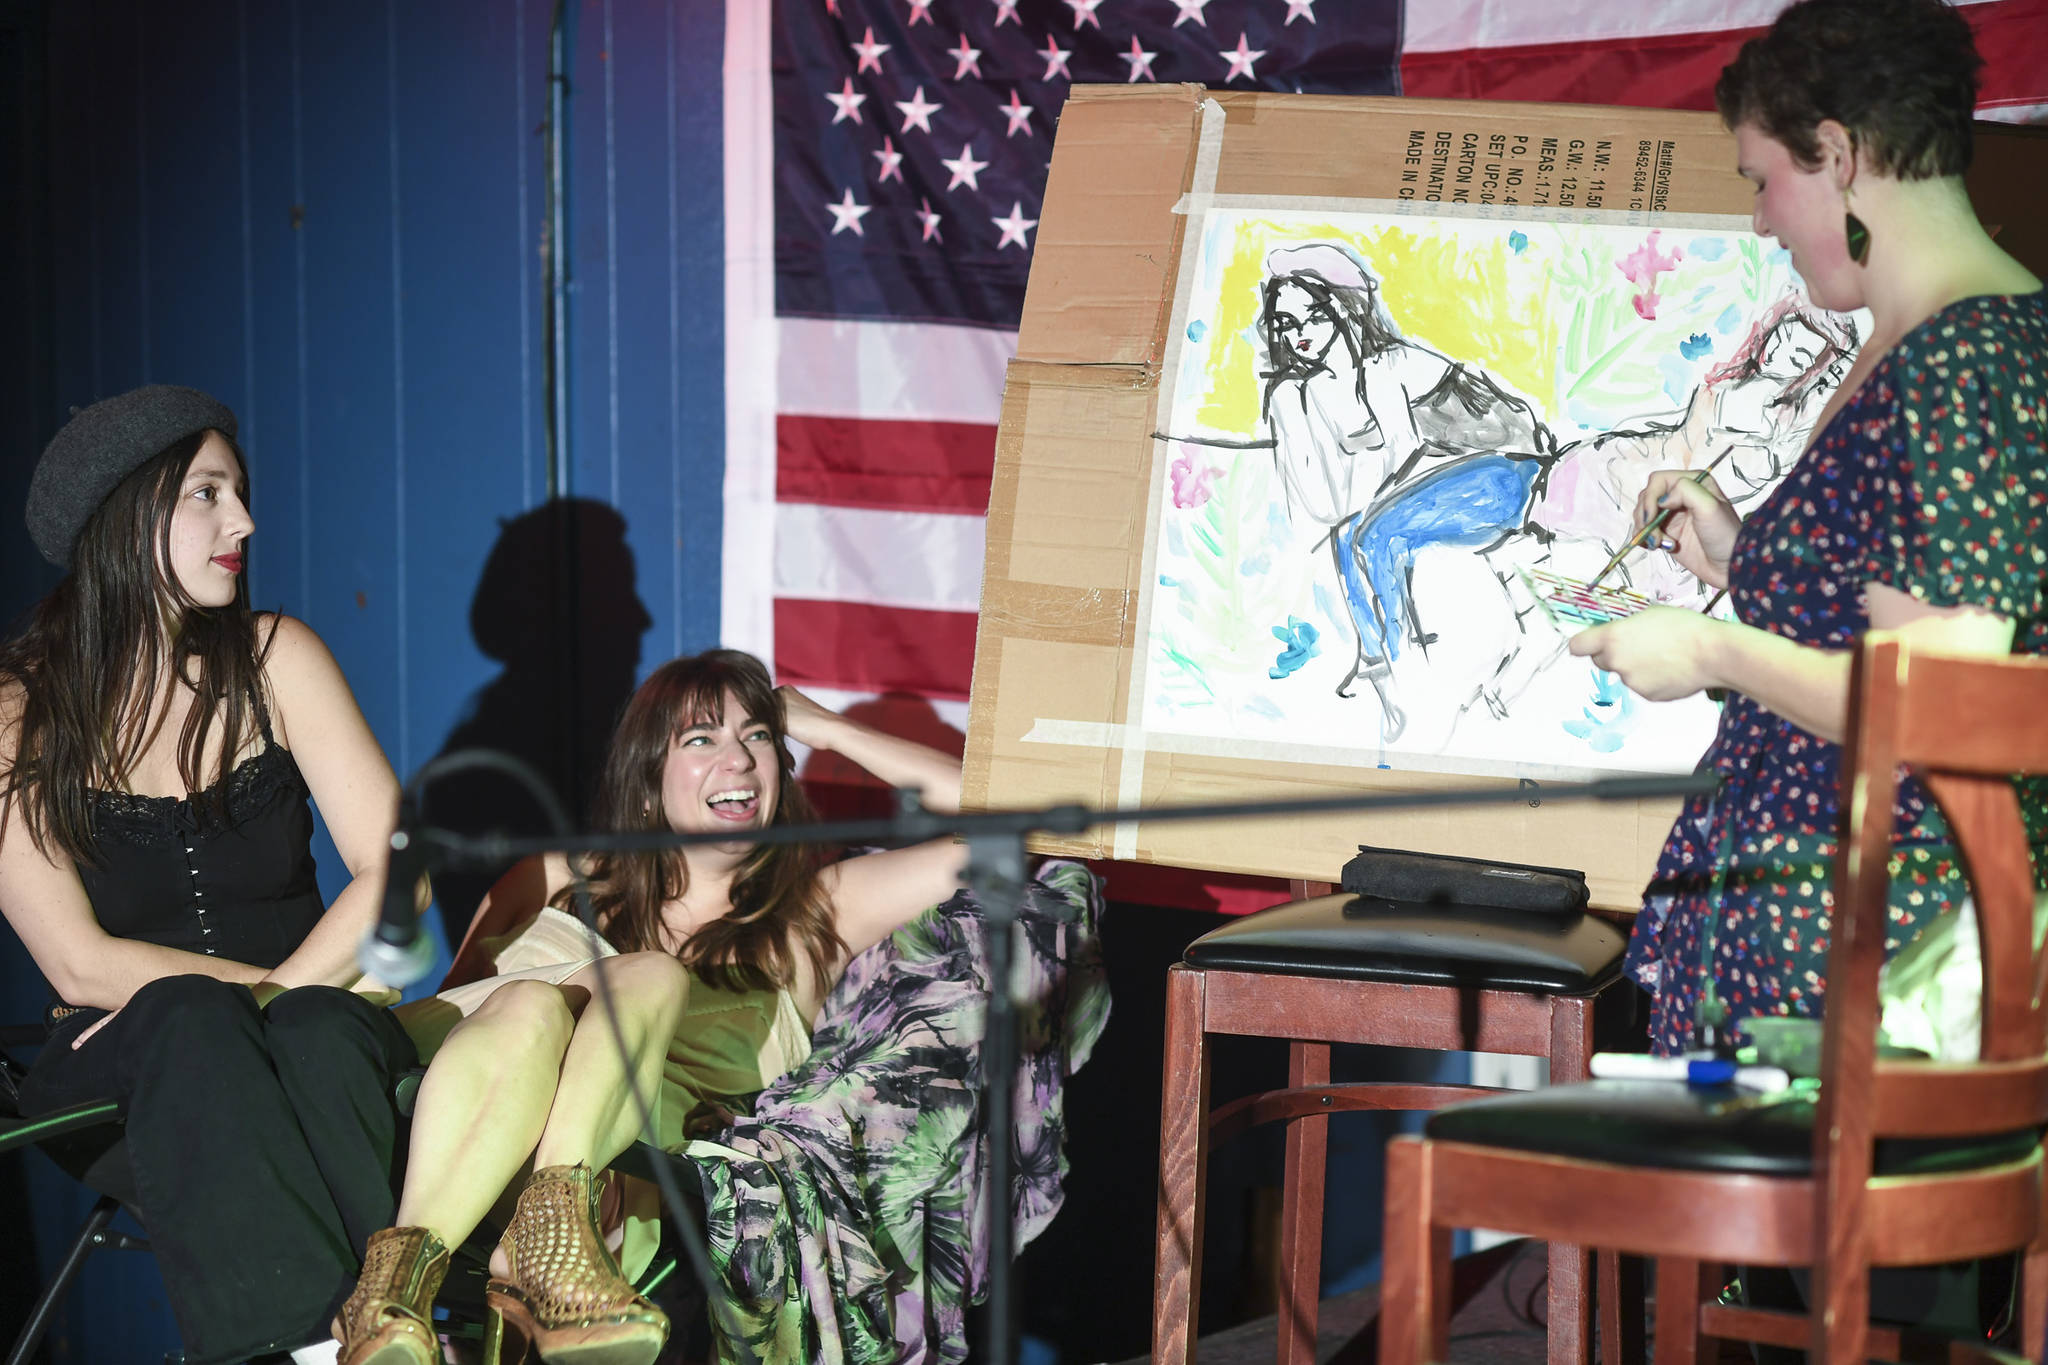 Natalie Weinberg, right, performs with a live model painting of Dana Herndon, center, and Serena Drazkowski during the GRLZ open mic night at the The Rendezvous Bar on Wednesday, Aug. 14, 2019. (Michael Penn | Juneau Empire)